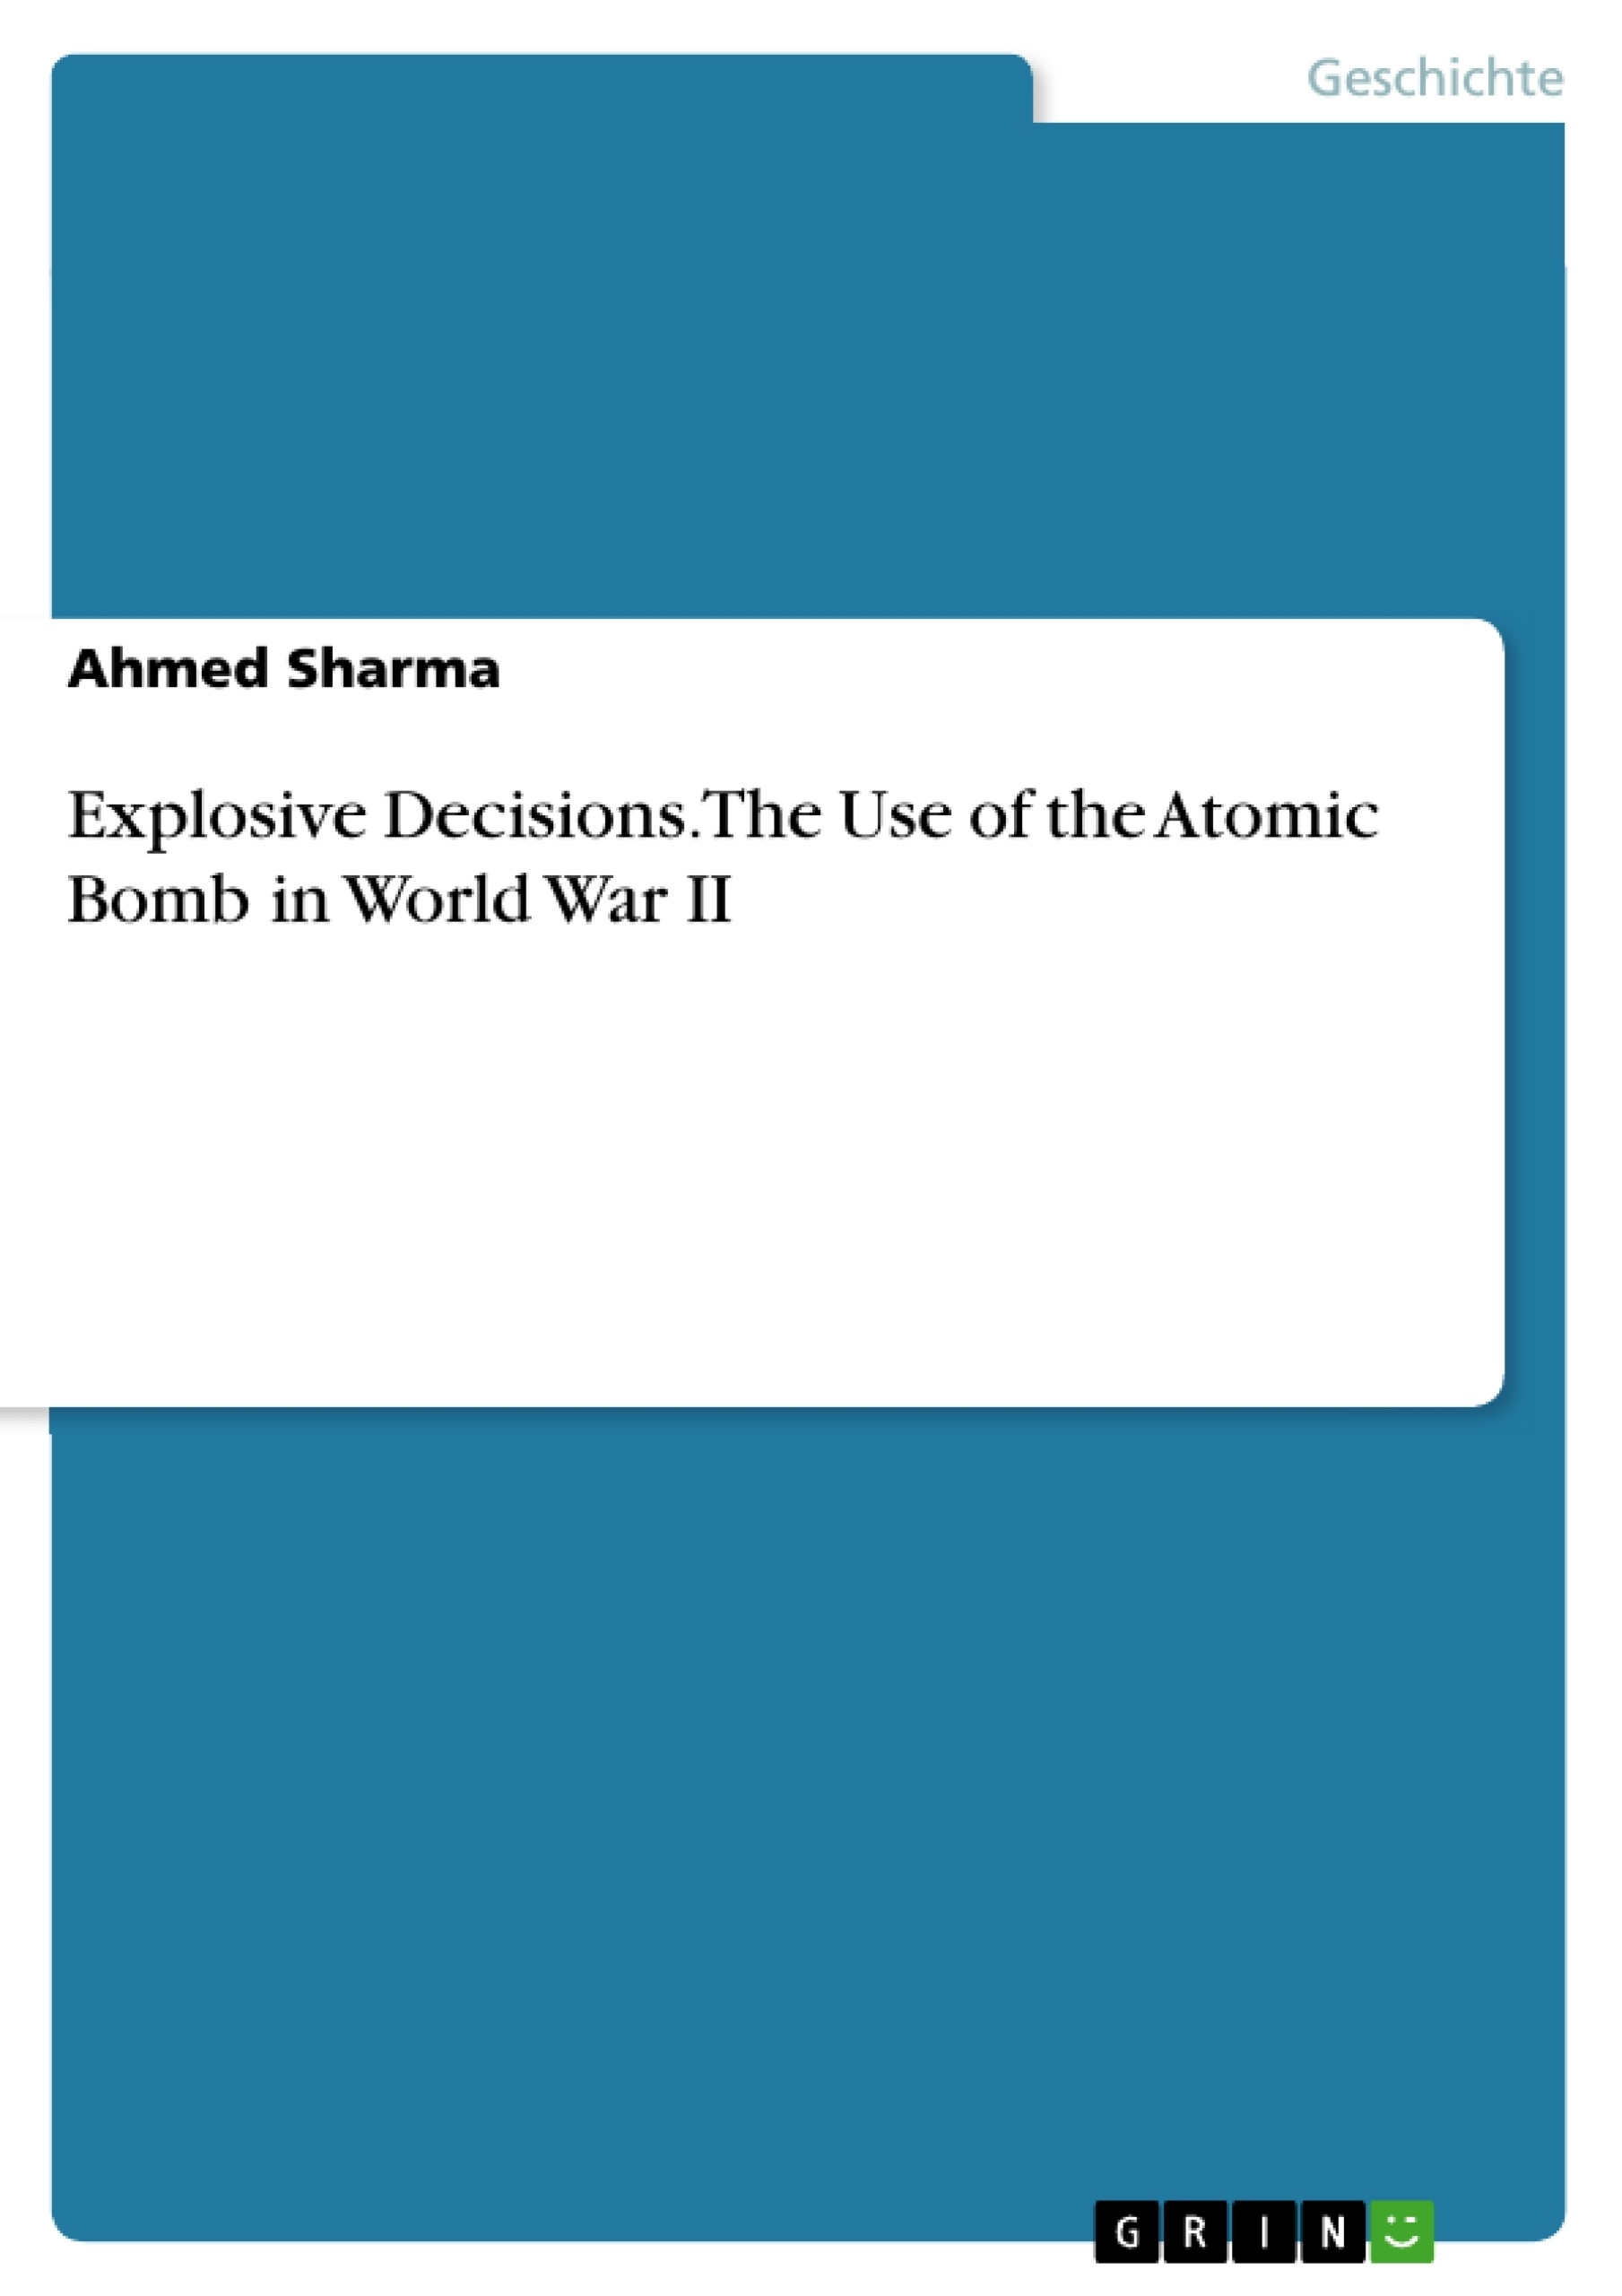 Titel: Explosive Decisions. The Use of the Atomic Bomb in World War II